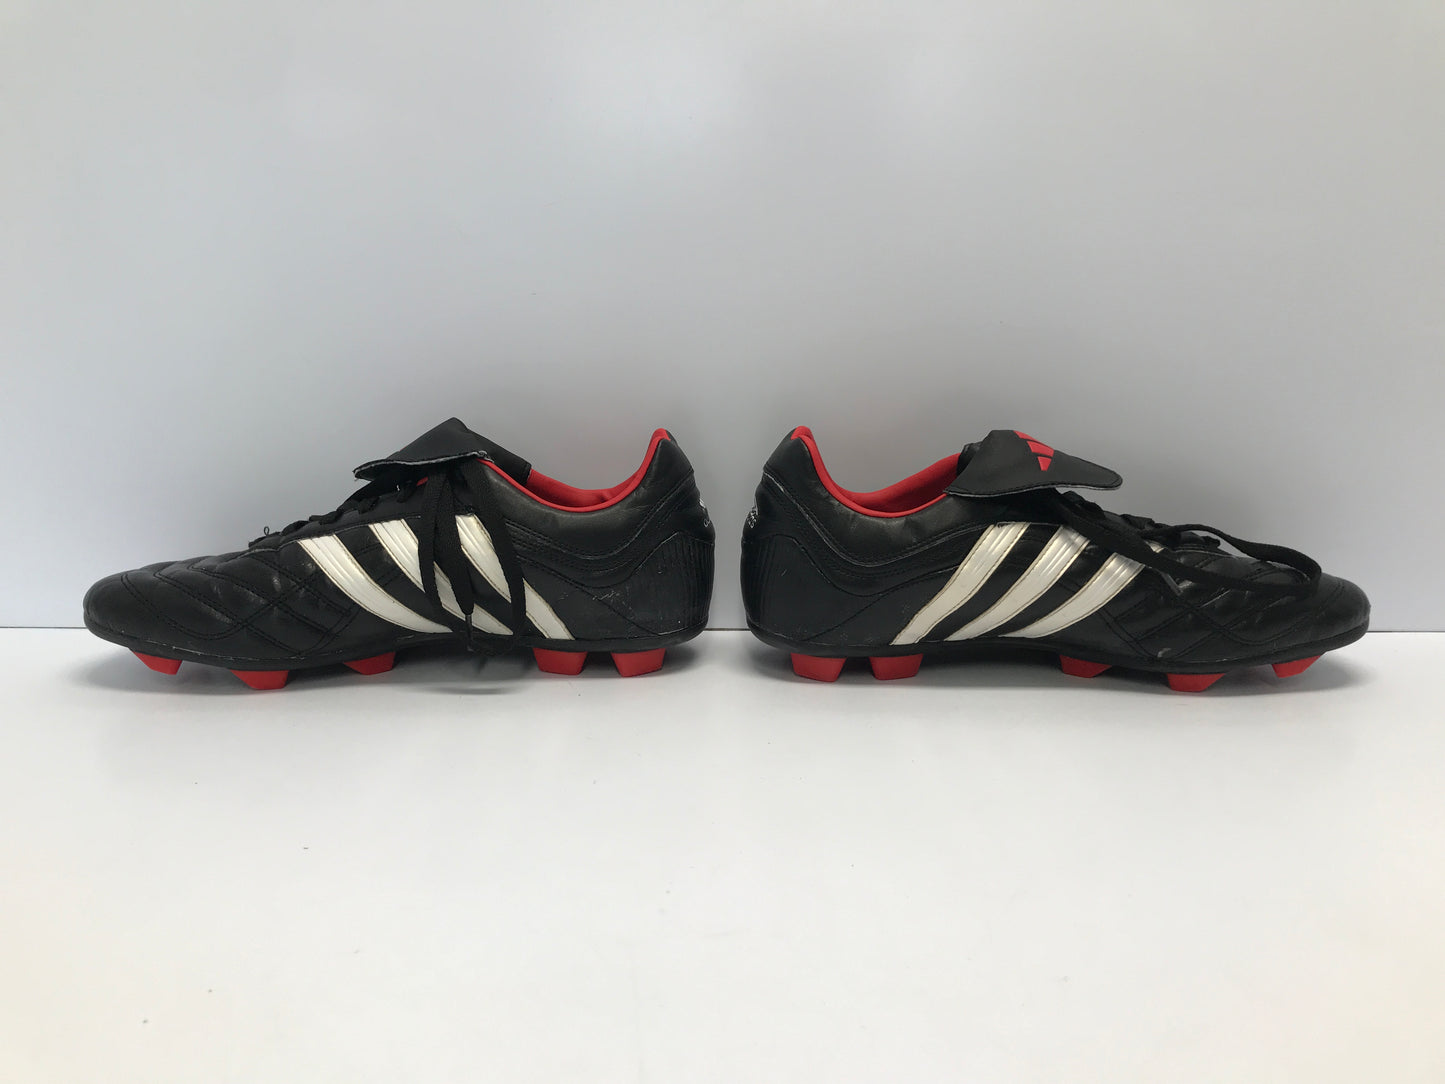 Soccer Shoes Cleats Men's Size 11 Adidas Black White Red Excellent